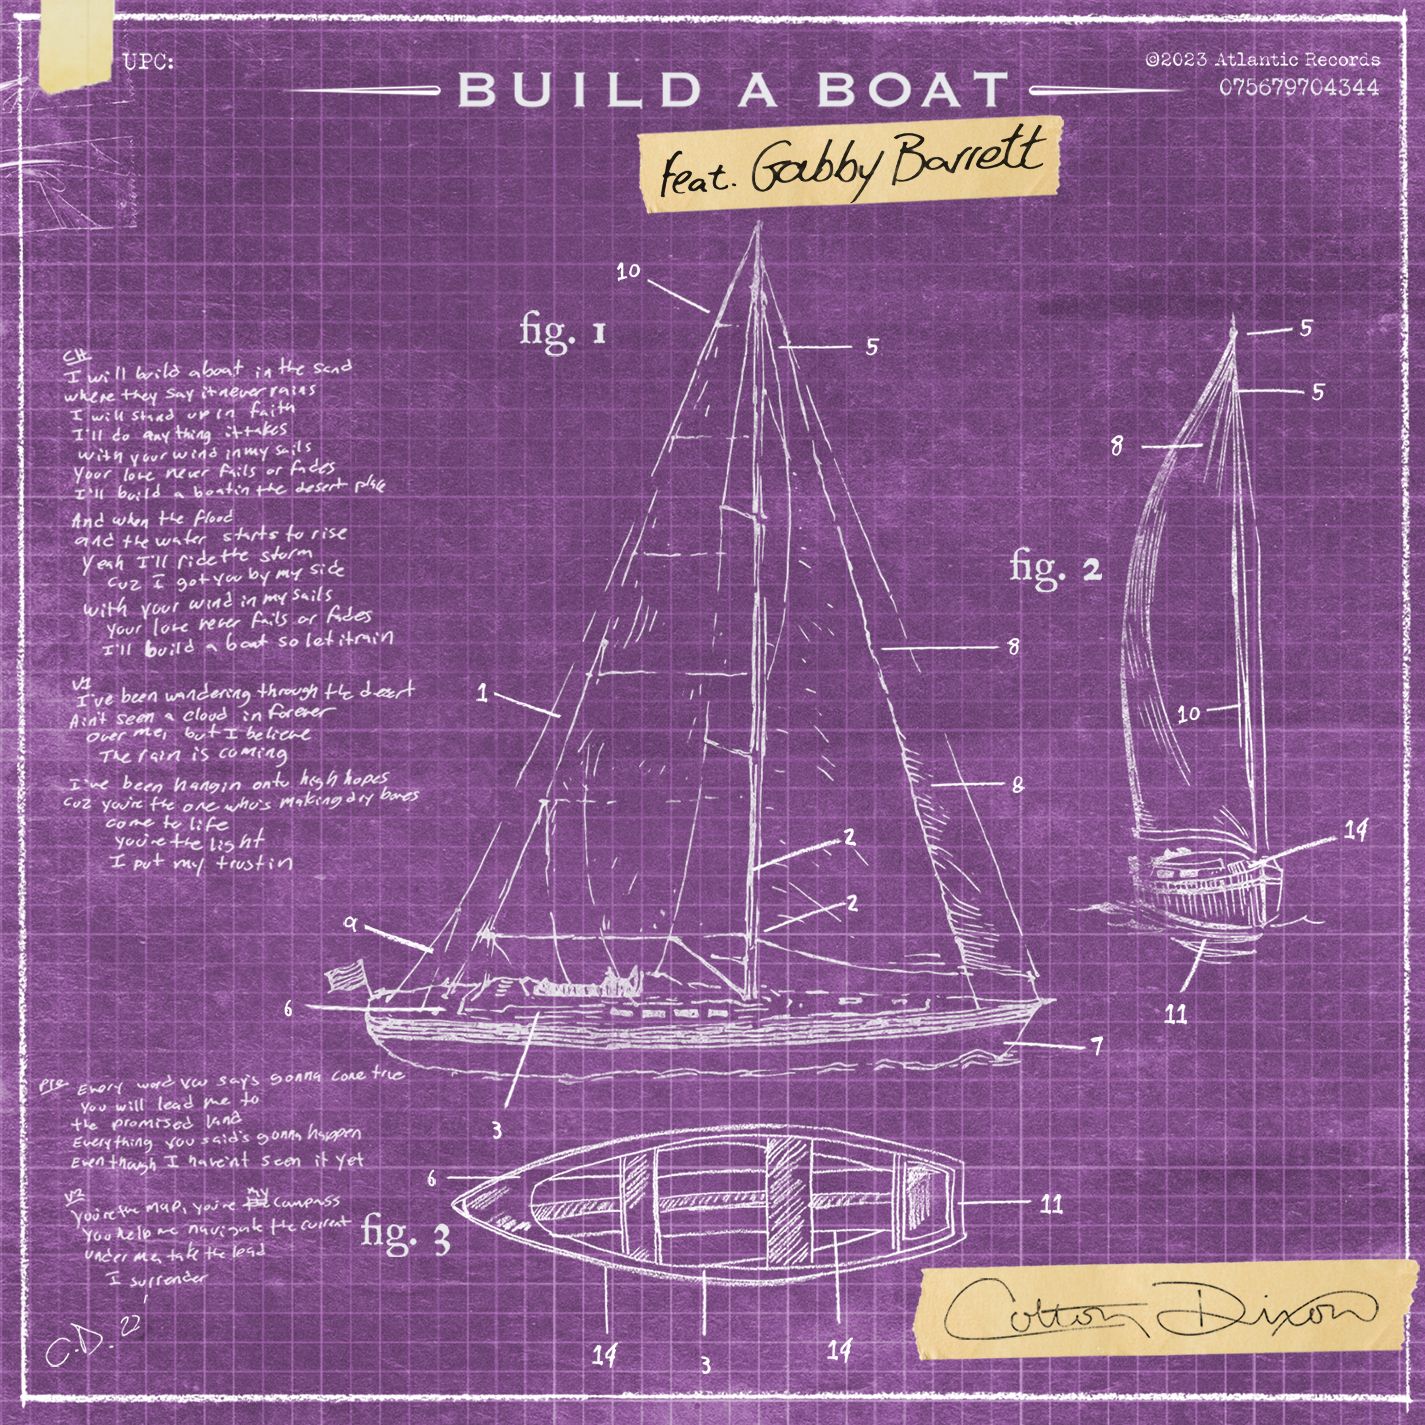 Colton Dixon and Gabby Barrett team for `Build A Boat` (Image courtesy of The Media Collective)